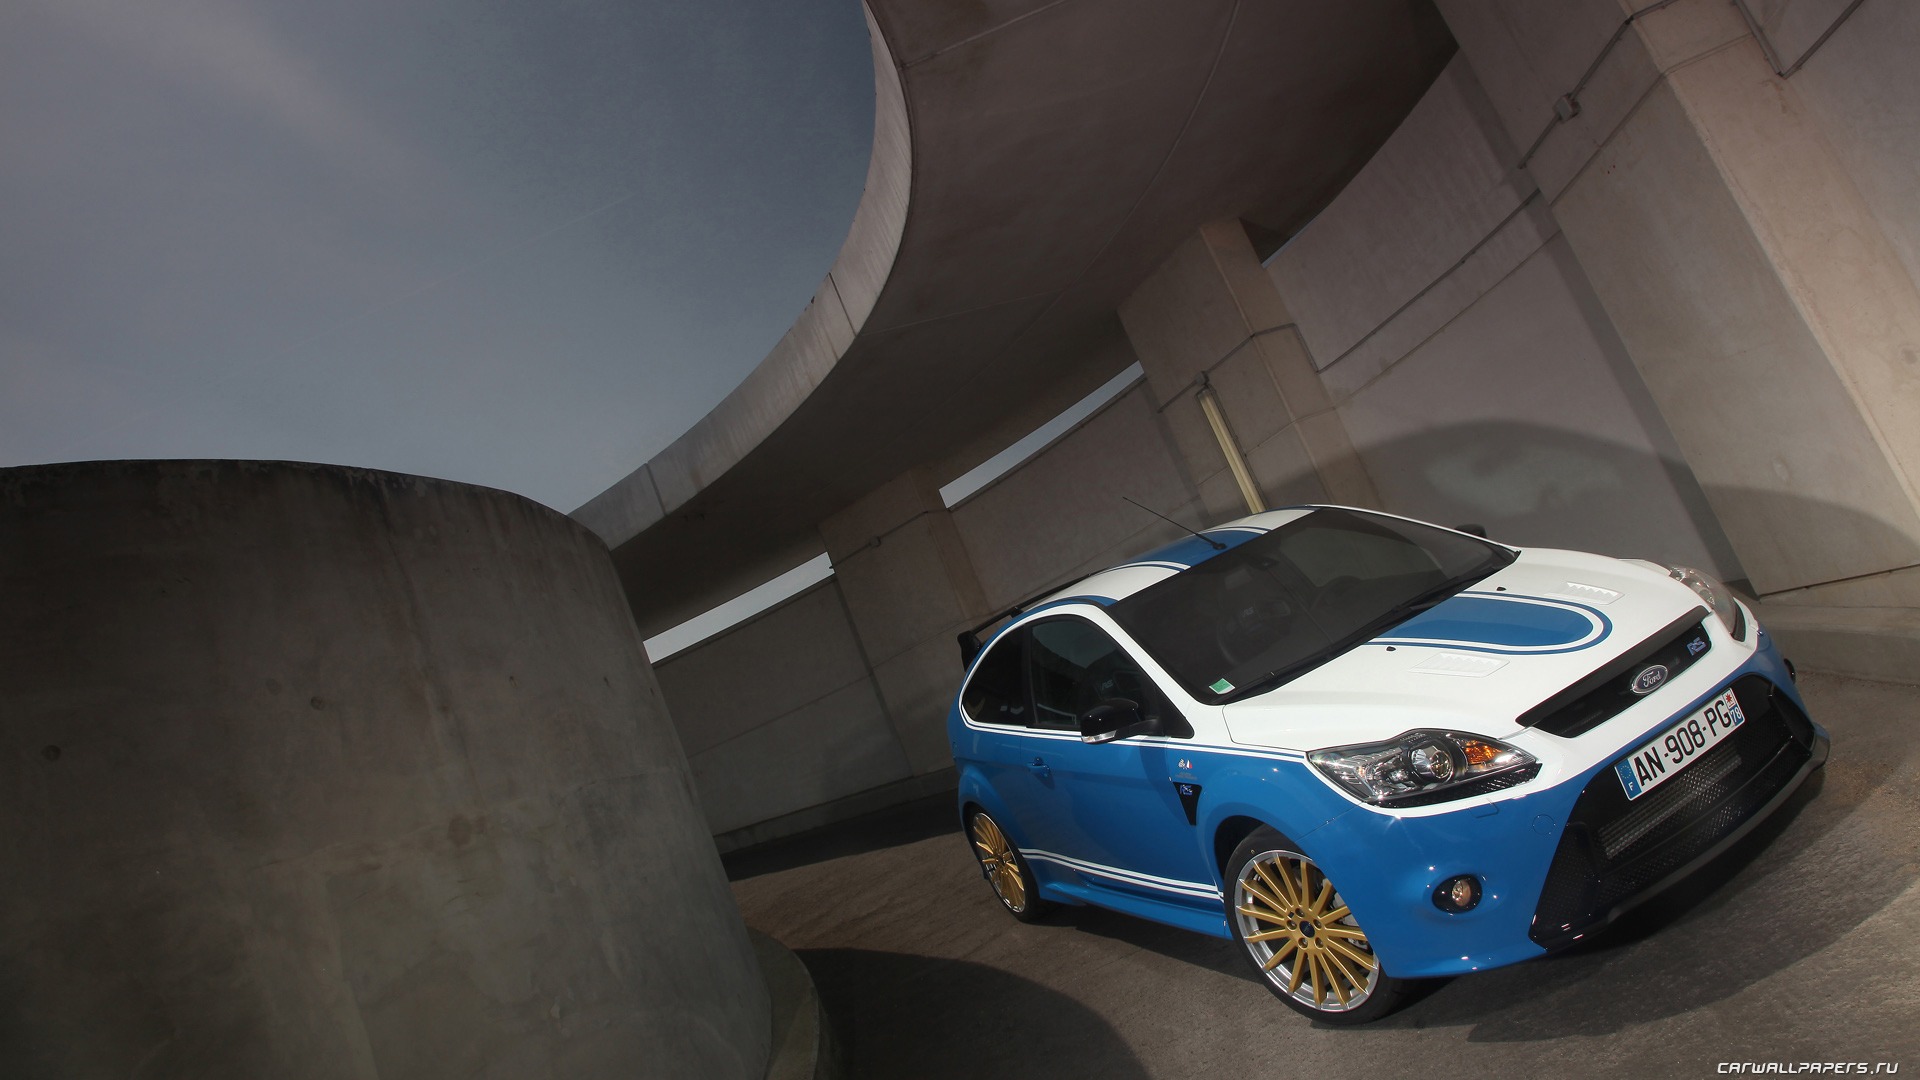 Ford Focus RS Le Mans Classic - 2010 HD Wallpaper #4 - 1920x1080